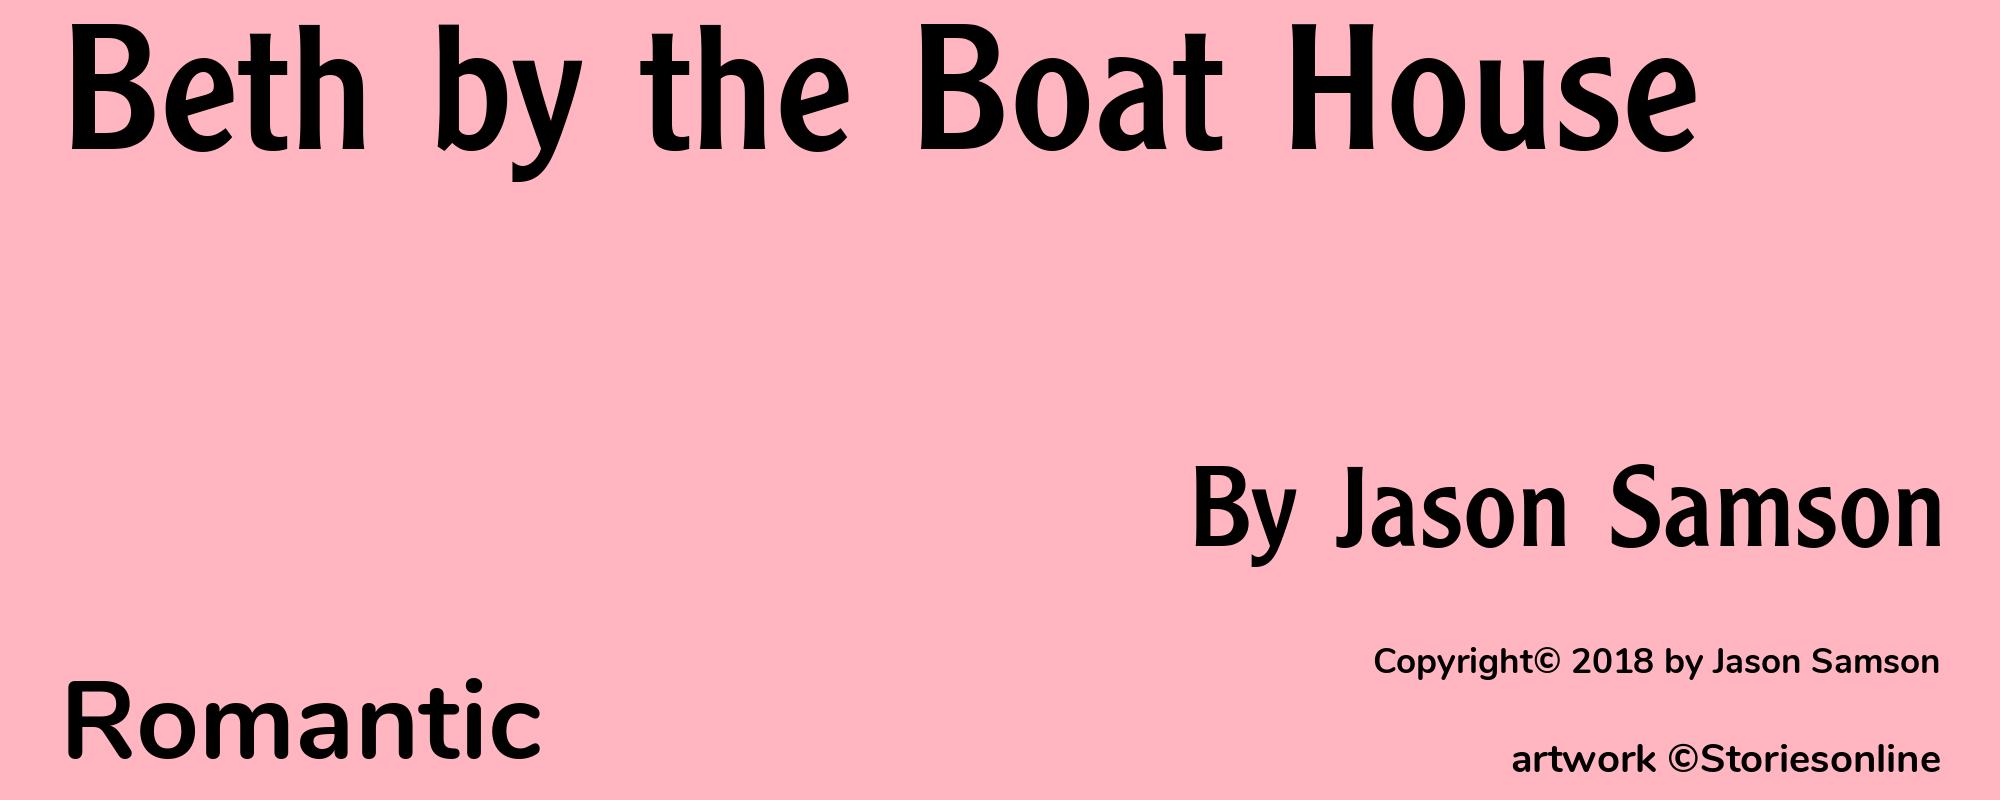 Beth by the Boat House - Cover